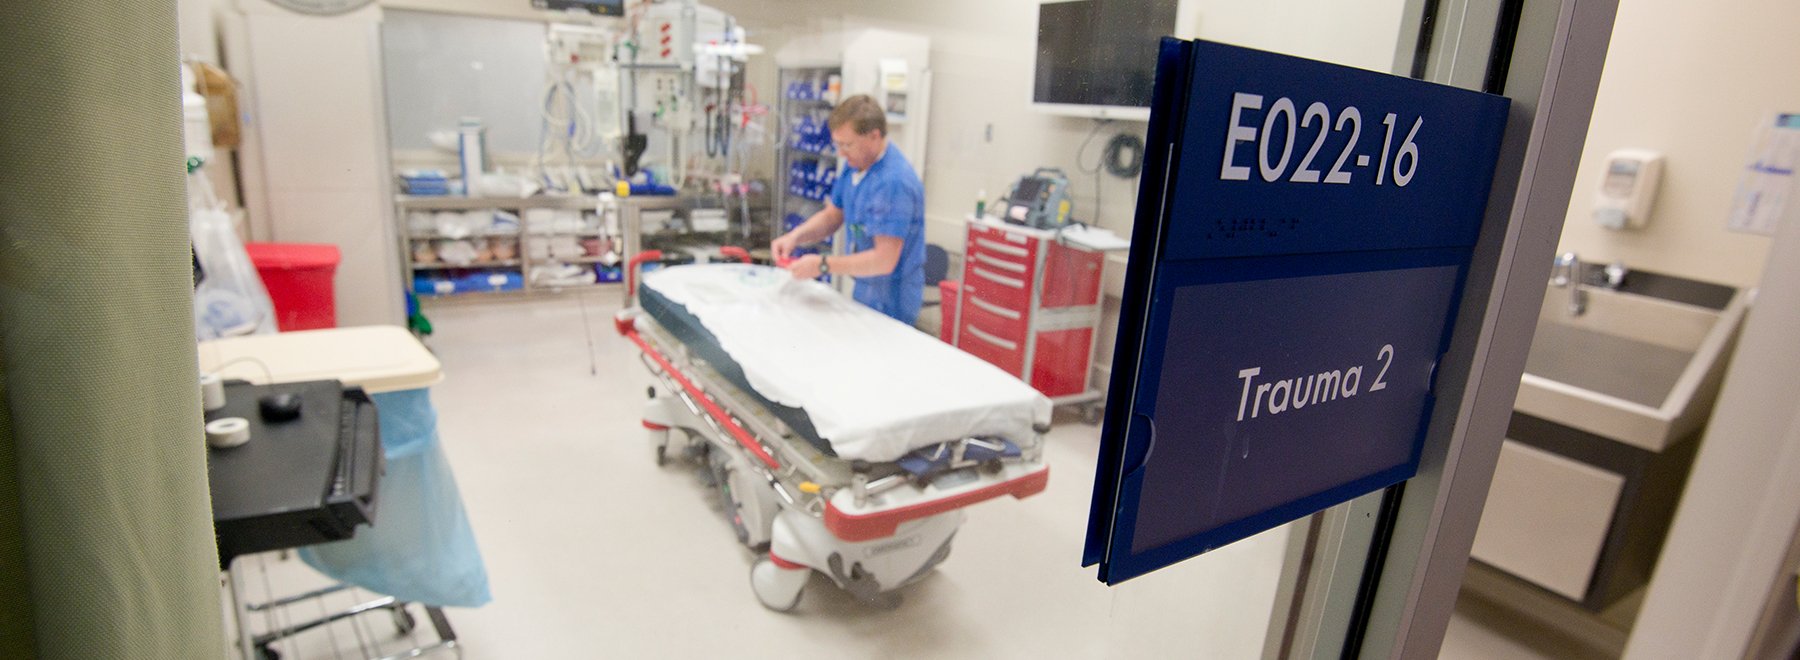 Male staff member readying a hospital bed in an empty trauma room